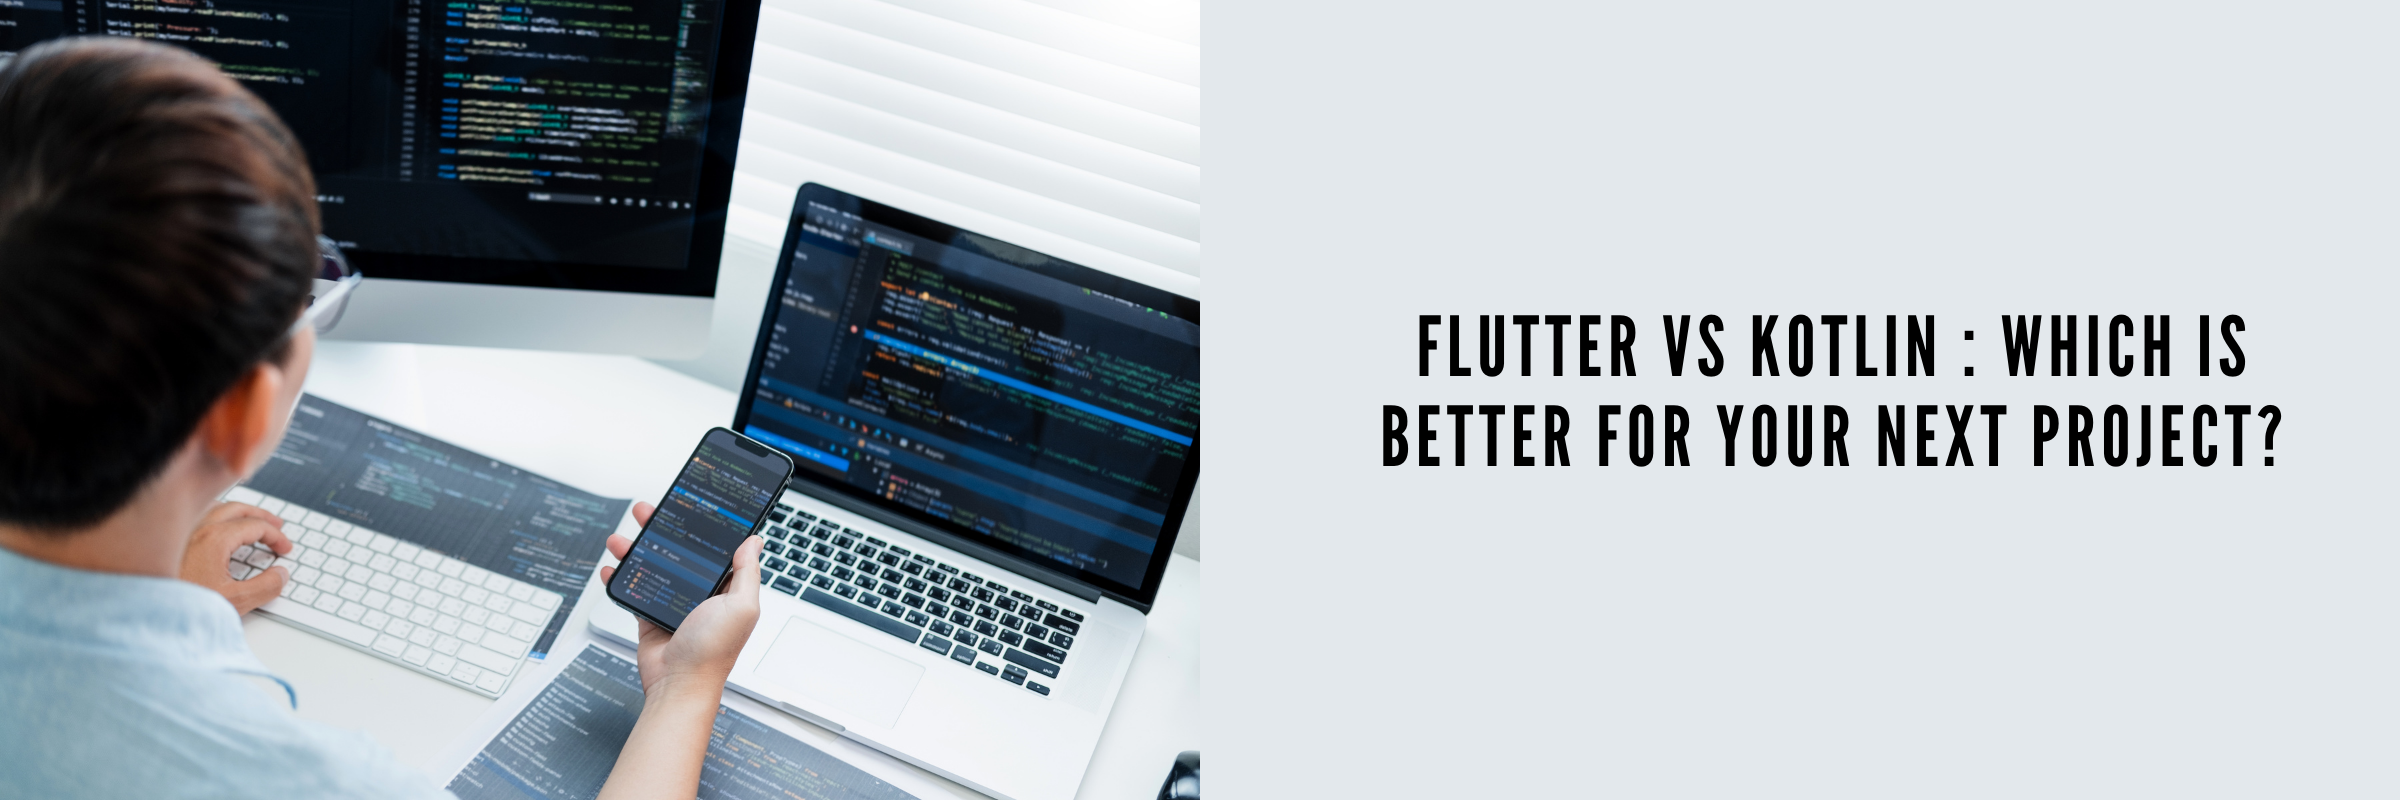 Flutter vs Kotlin: Which is Better For Your Next Project?